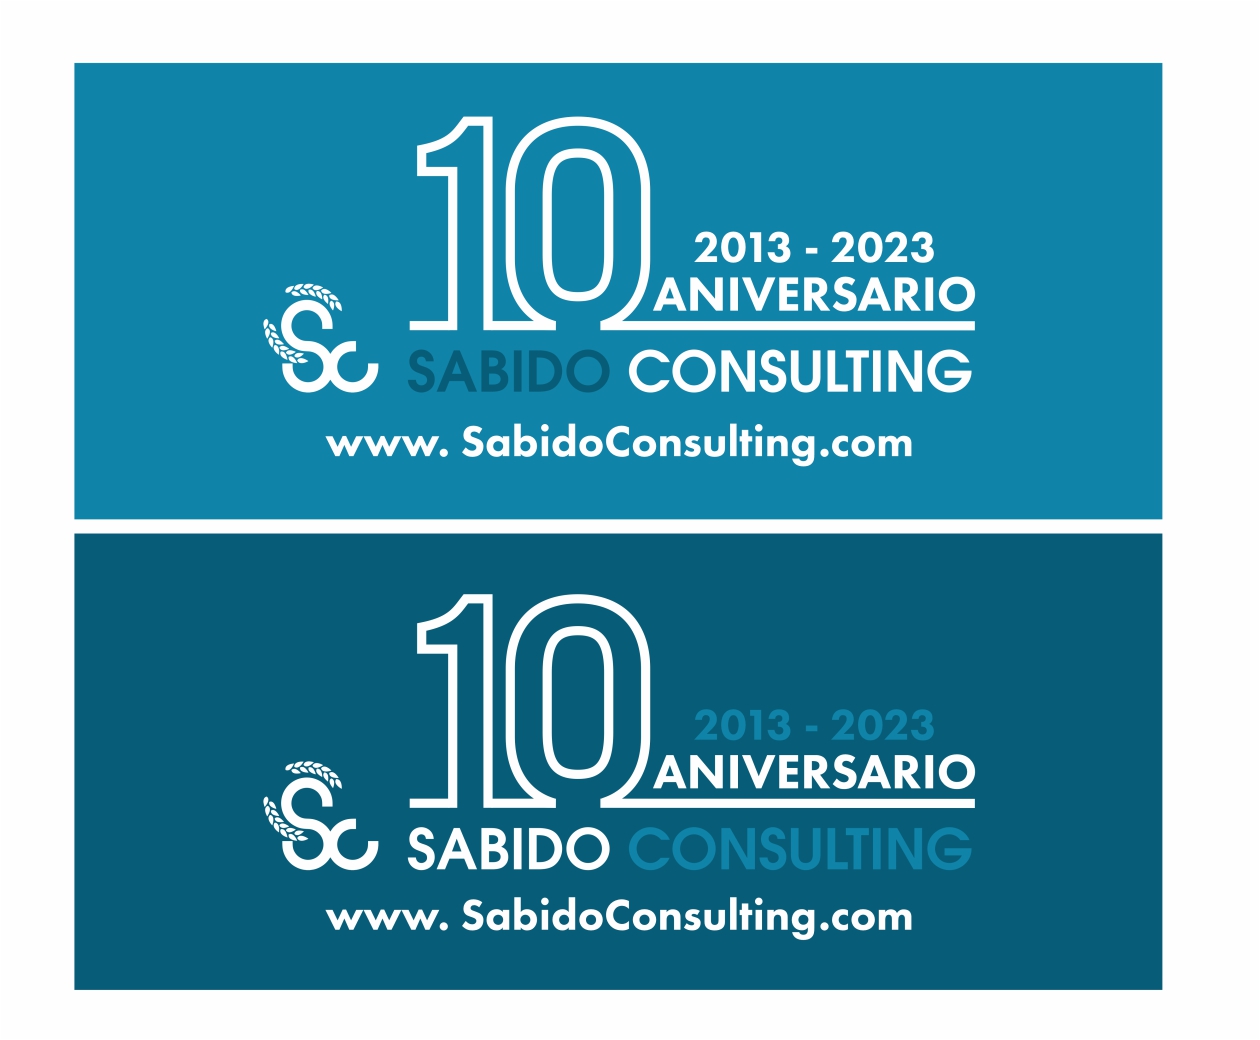 Images Sabido Consulting